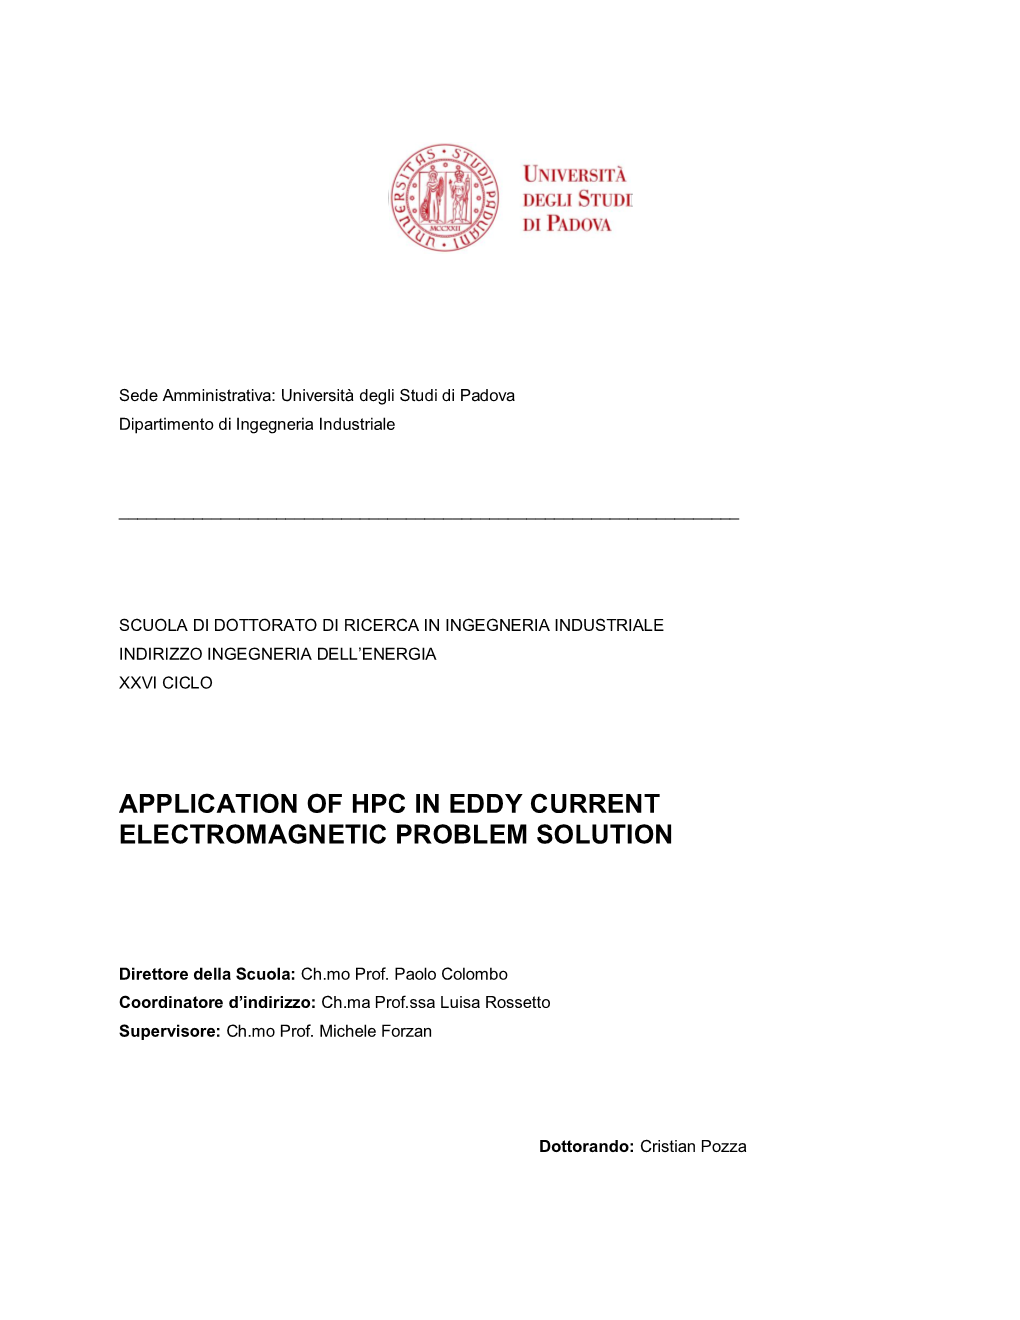 Application of Hpc in Eddy Current Electromagnetic Problem Solution